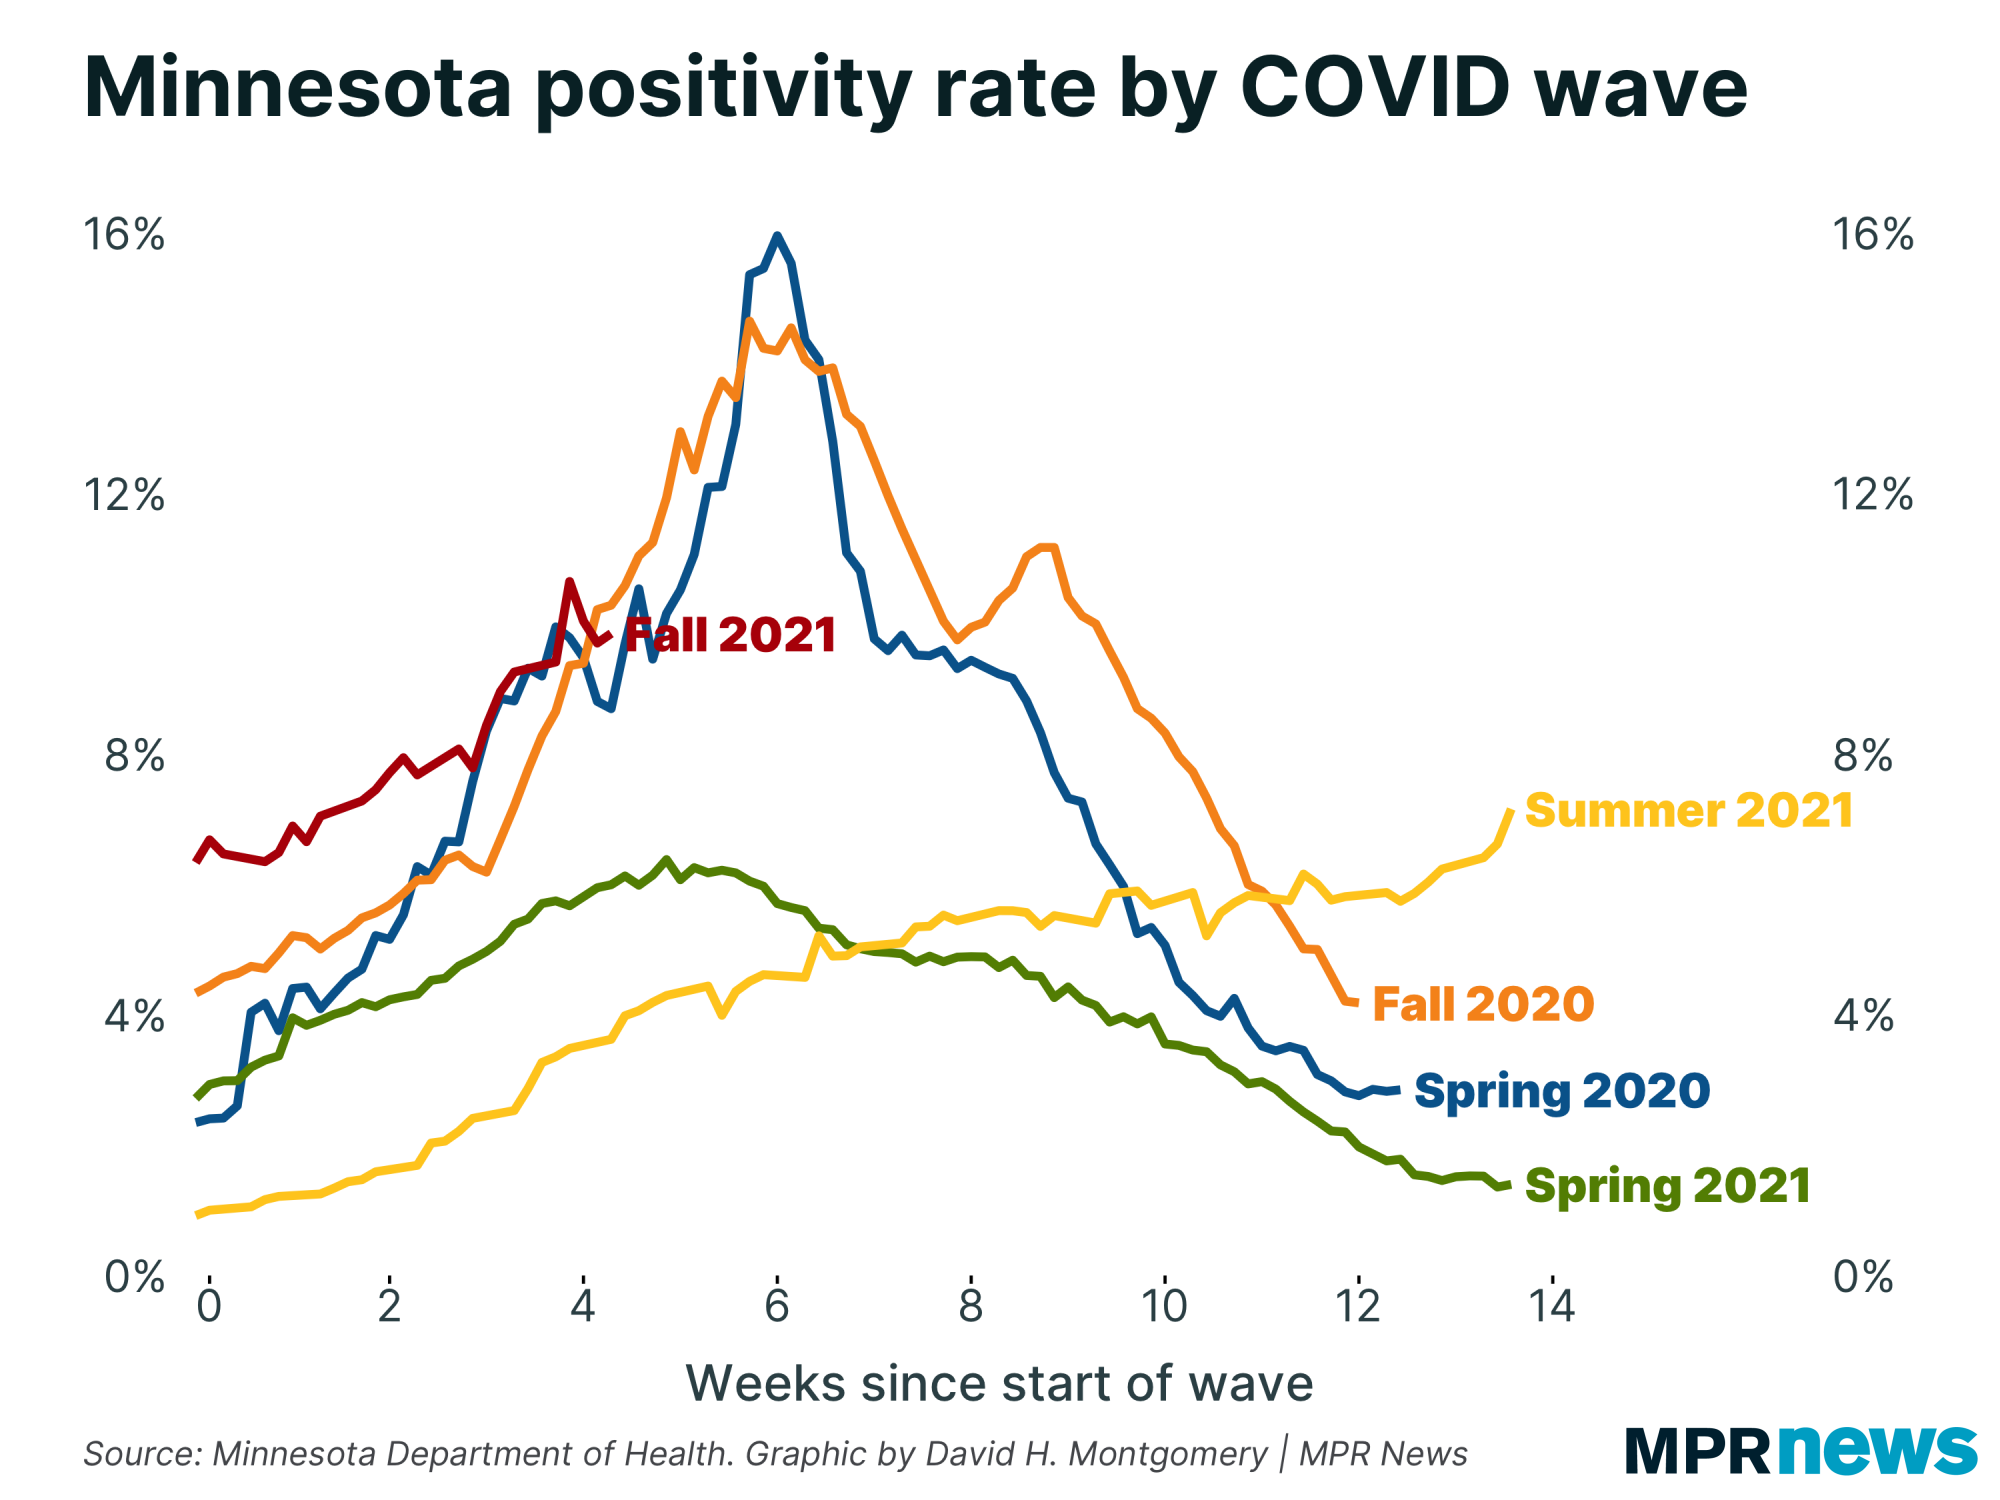 Graph of COVID-19 positivity rate by wave in Minnesota